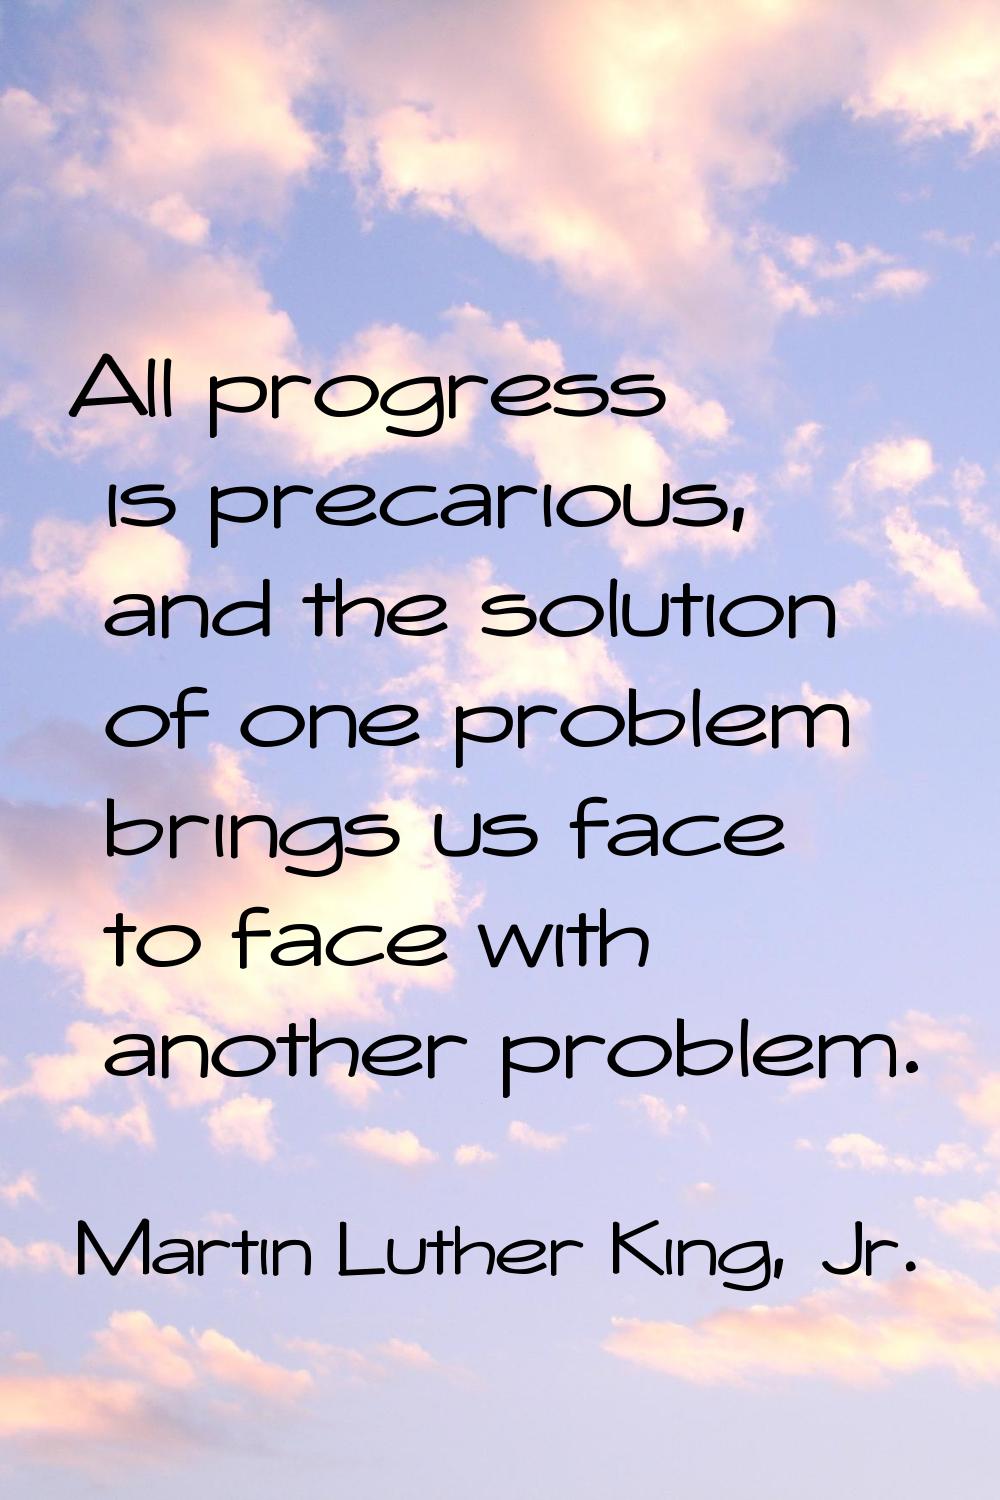 All progress is precarious, and the solution of one problem brings us face to face with another pro